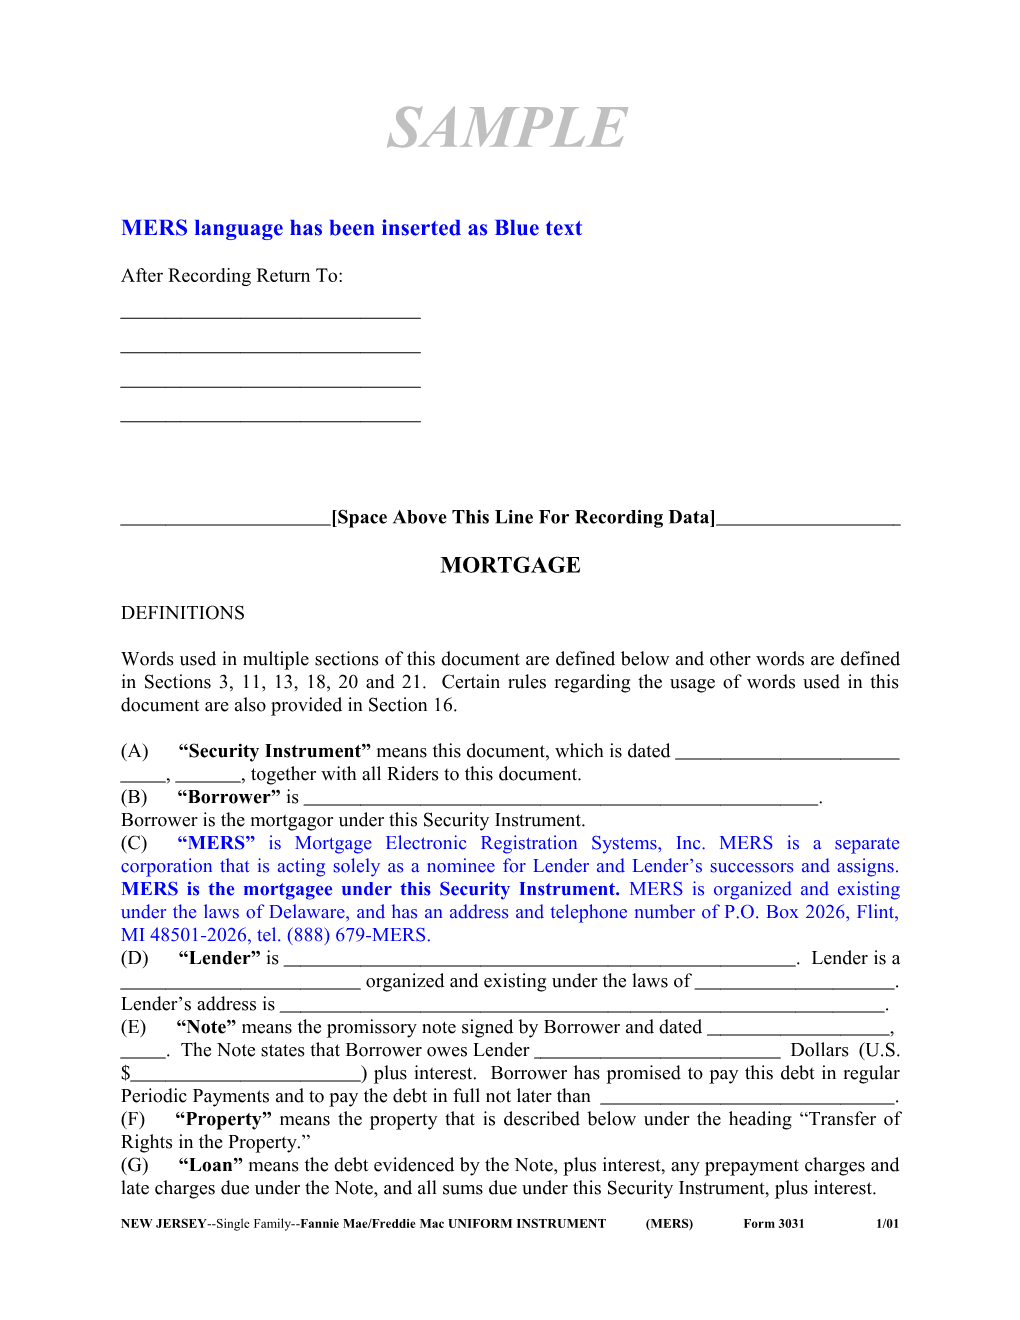 New Jersey Mortgage (MERS)